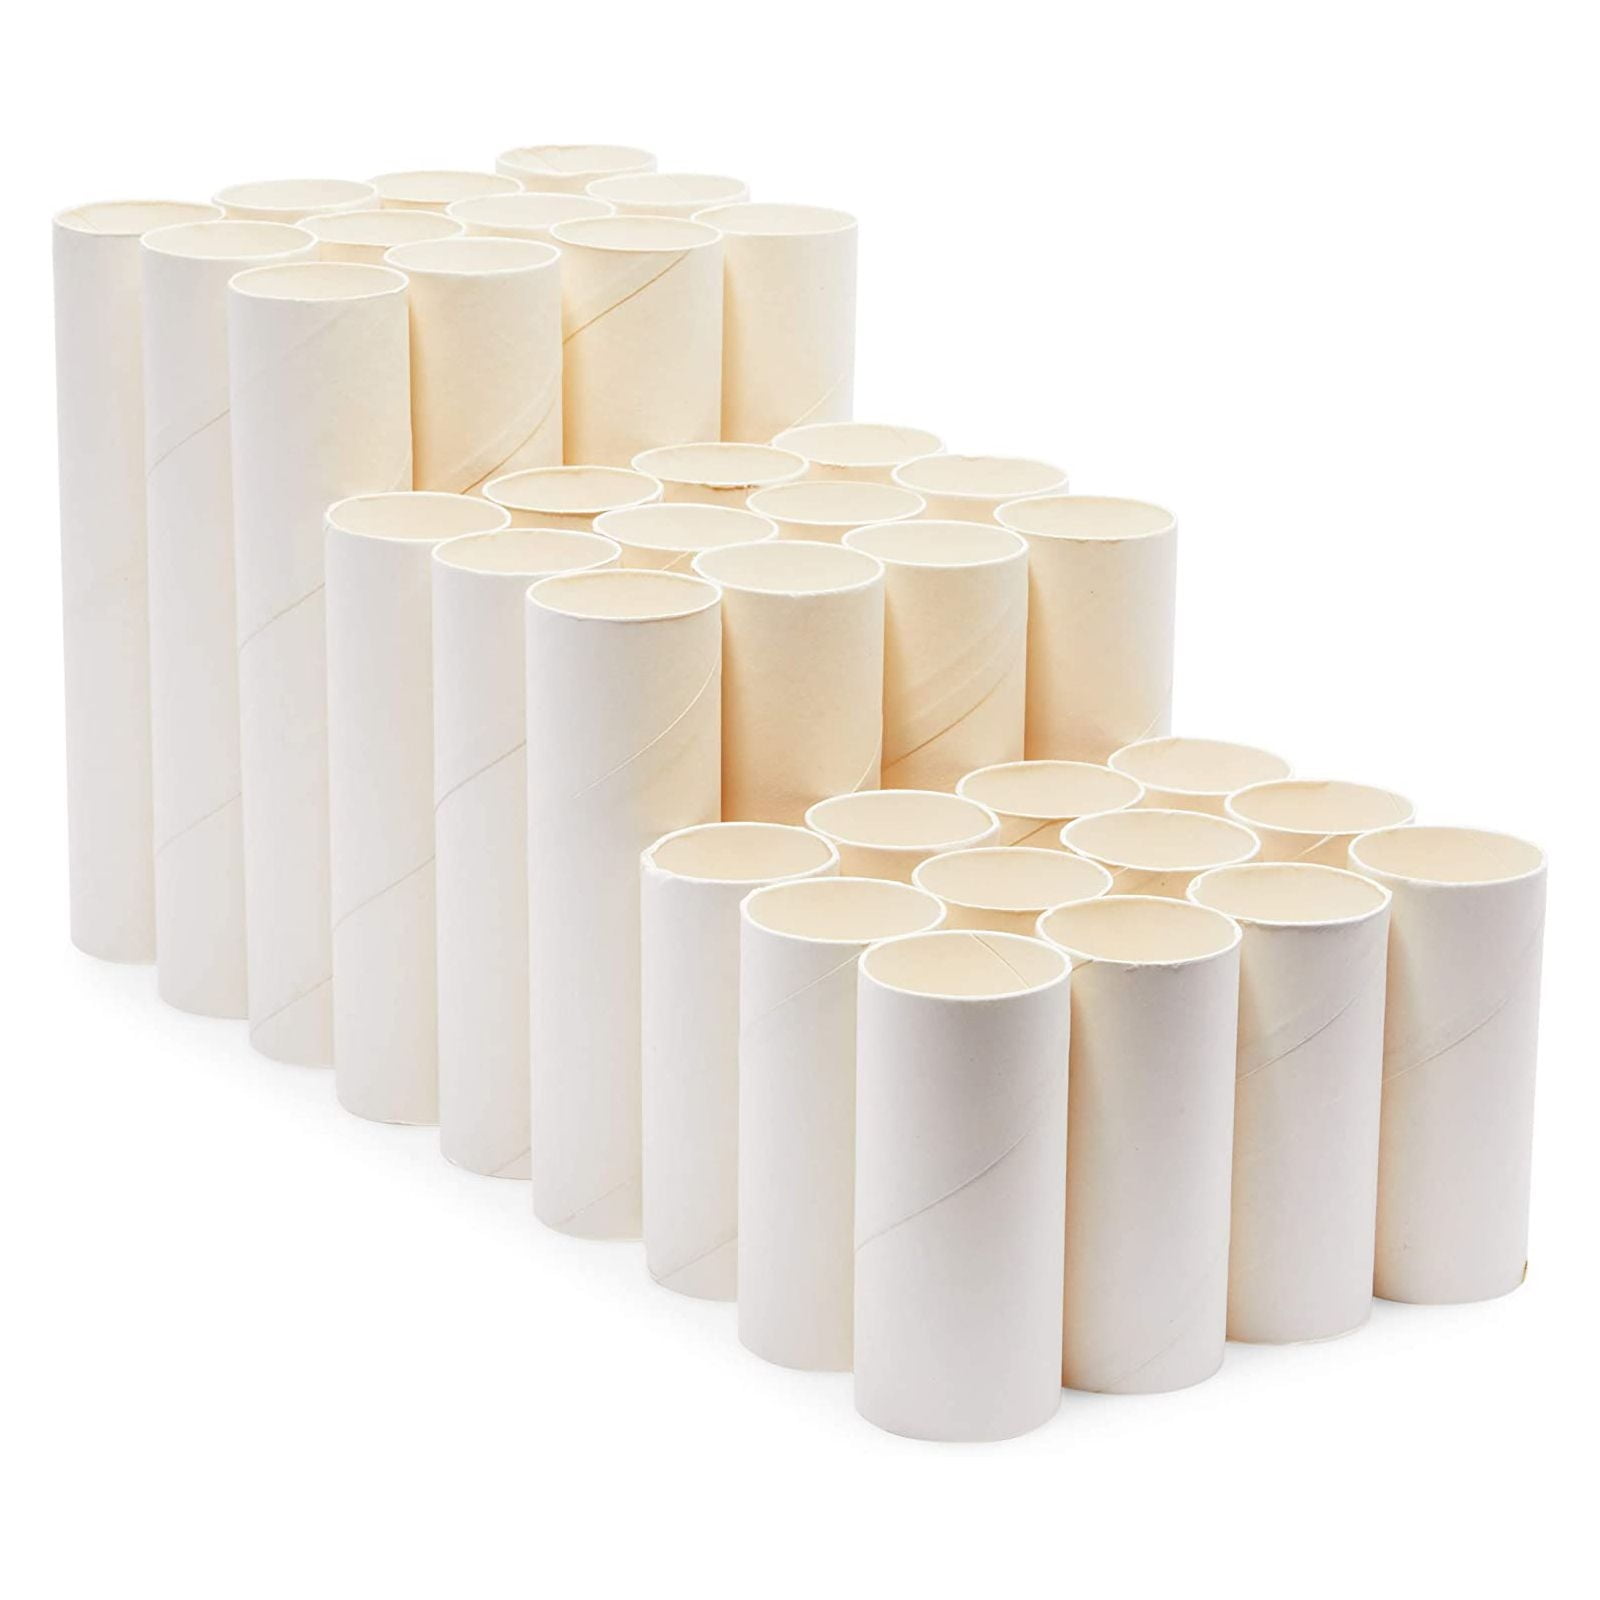 BESPORTBLE 36 pcs Rolls Empty Cardboard Tubes Cardboard Tube Crafts Round  Cardboard Tube Cardboard Art Tubes Kids Arts and Crafts DIY Projects Paper